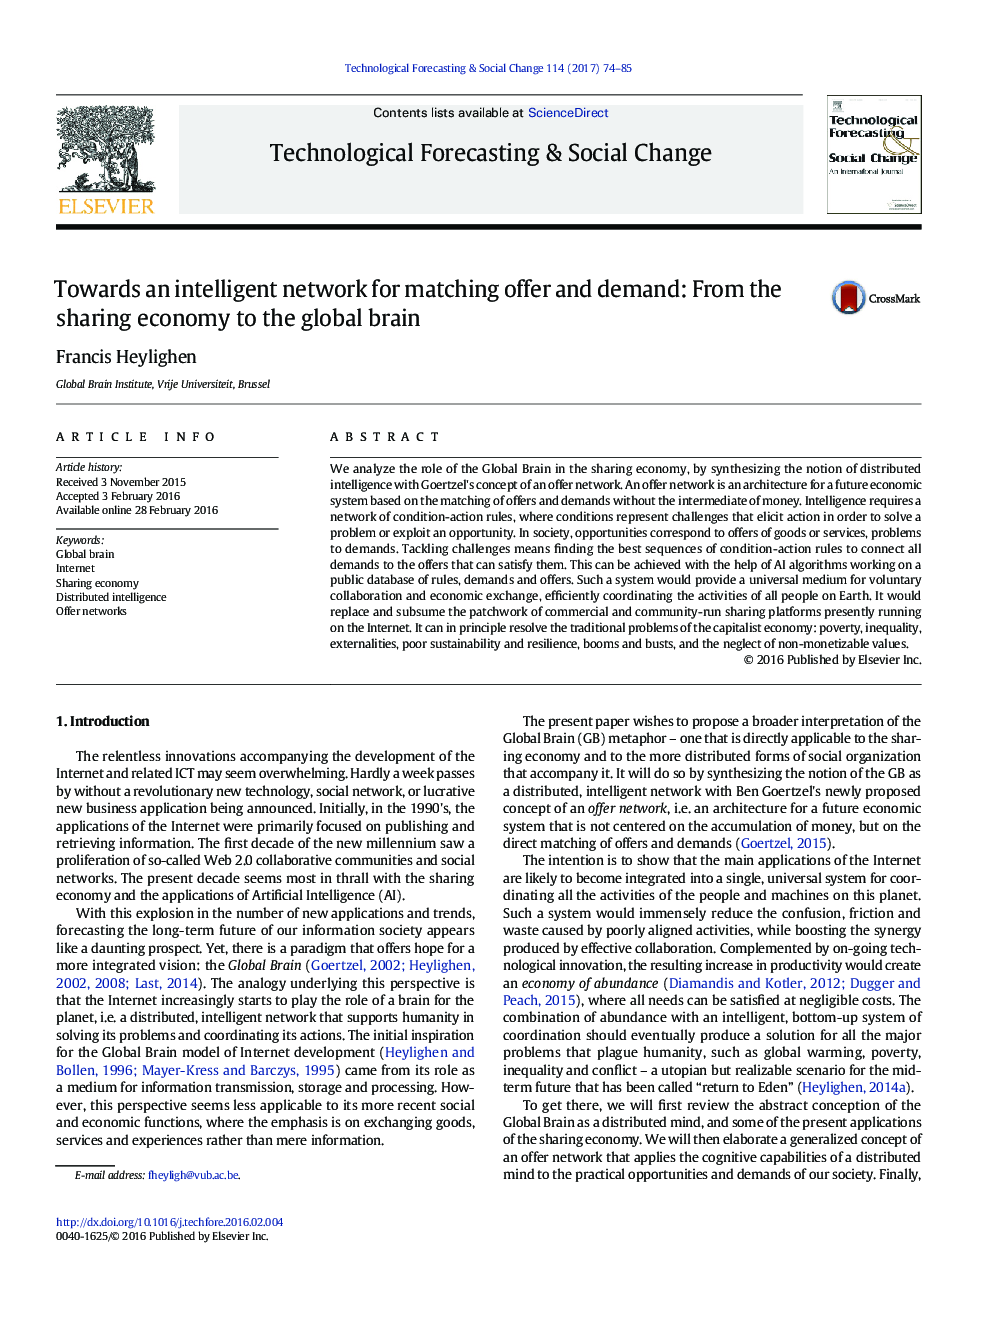 Towards an intelligent network for matching offer and demand: From the sharing economy to the global brain